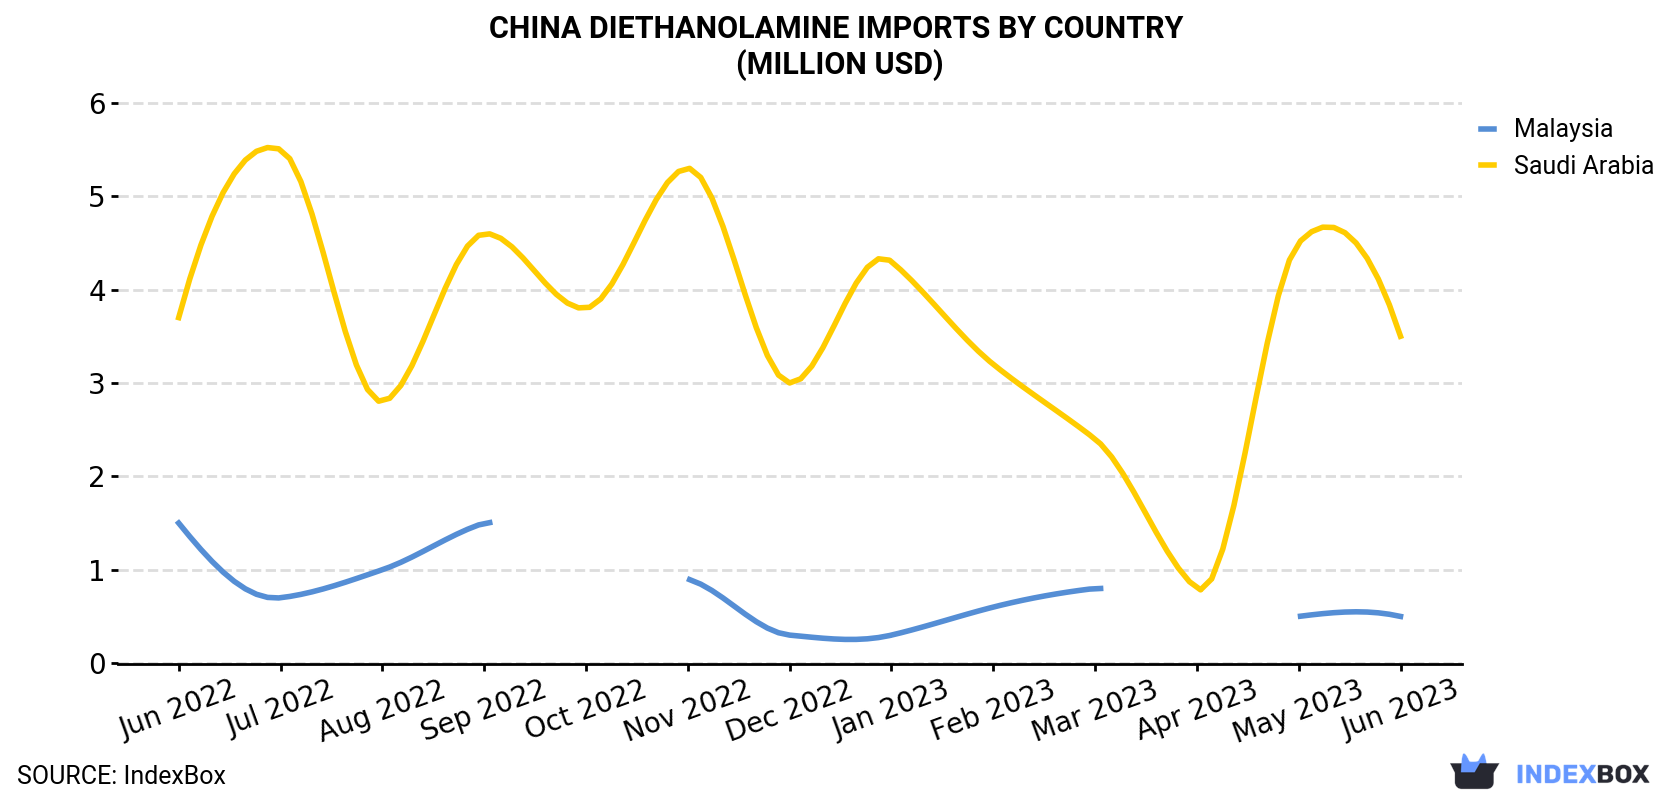 China Diethanolamine Imports By Country (Million USD)